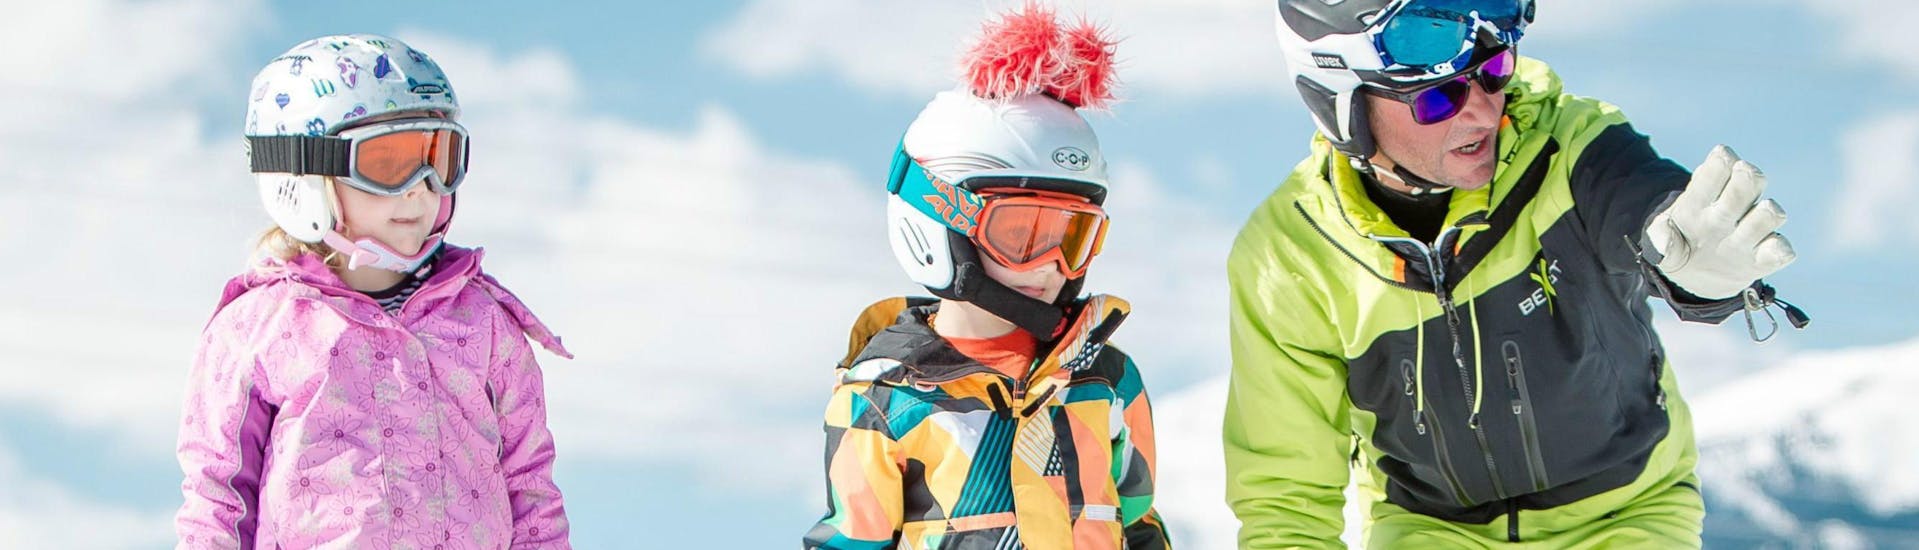 Private Ski Lessons for Kids of All Levels with Ski School Bewegt Kaprun - Hero image